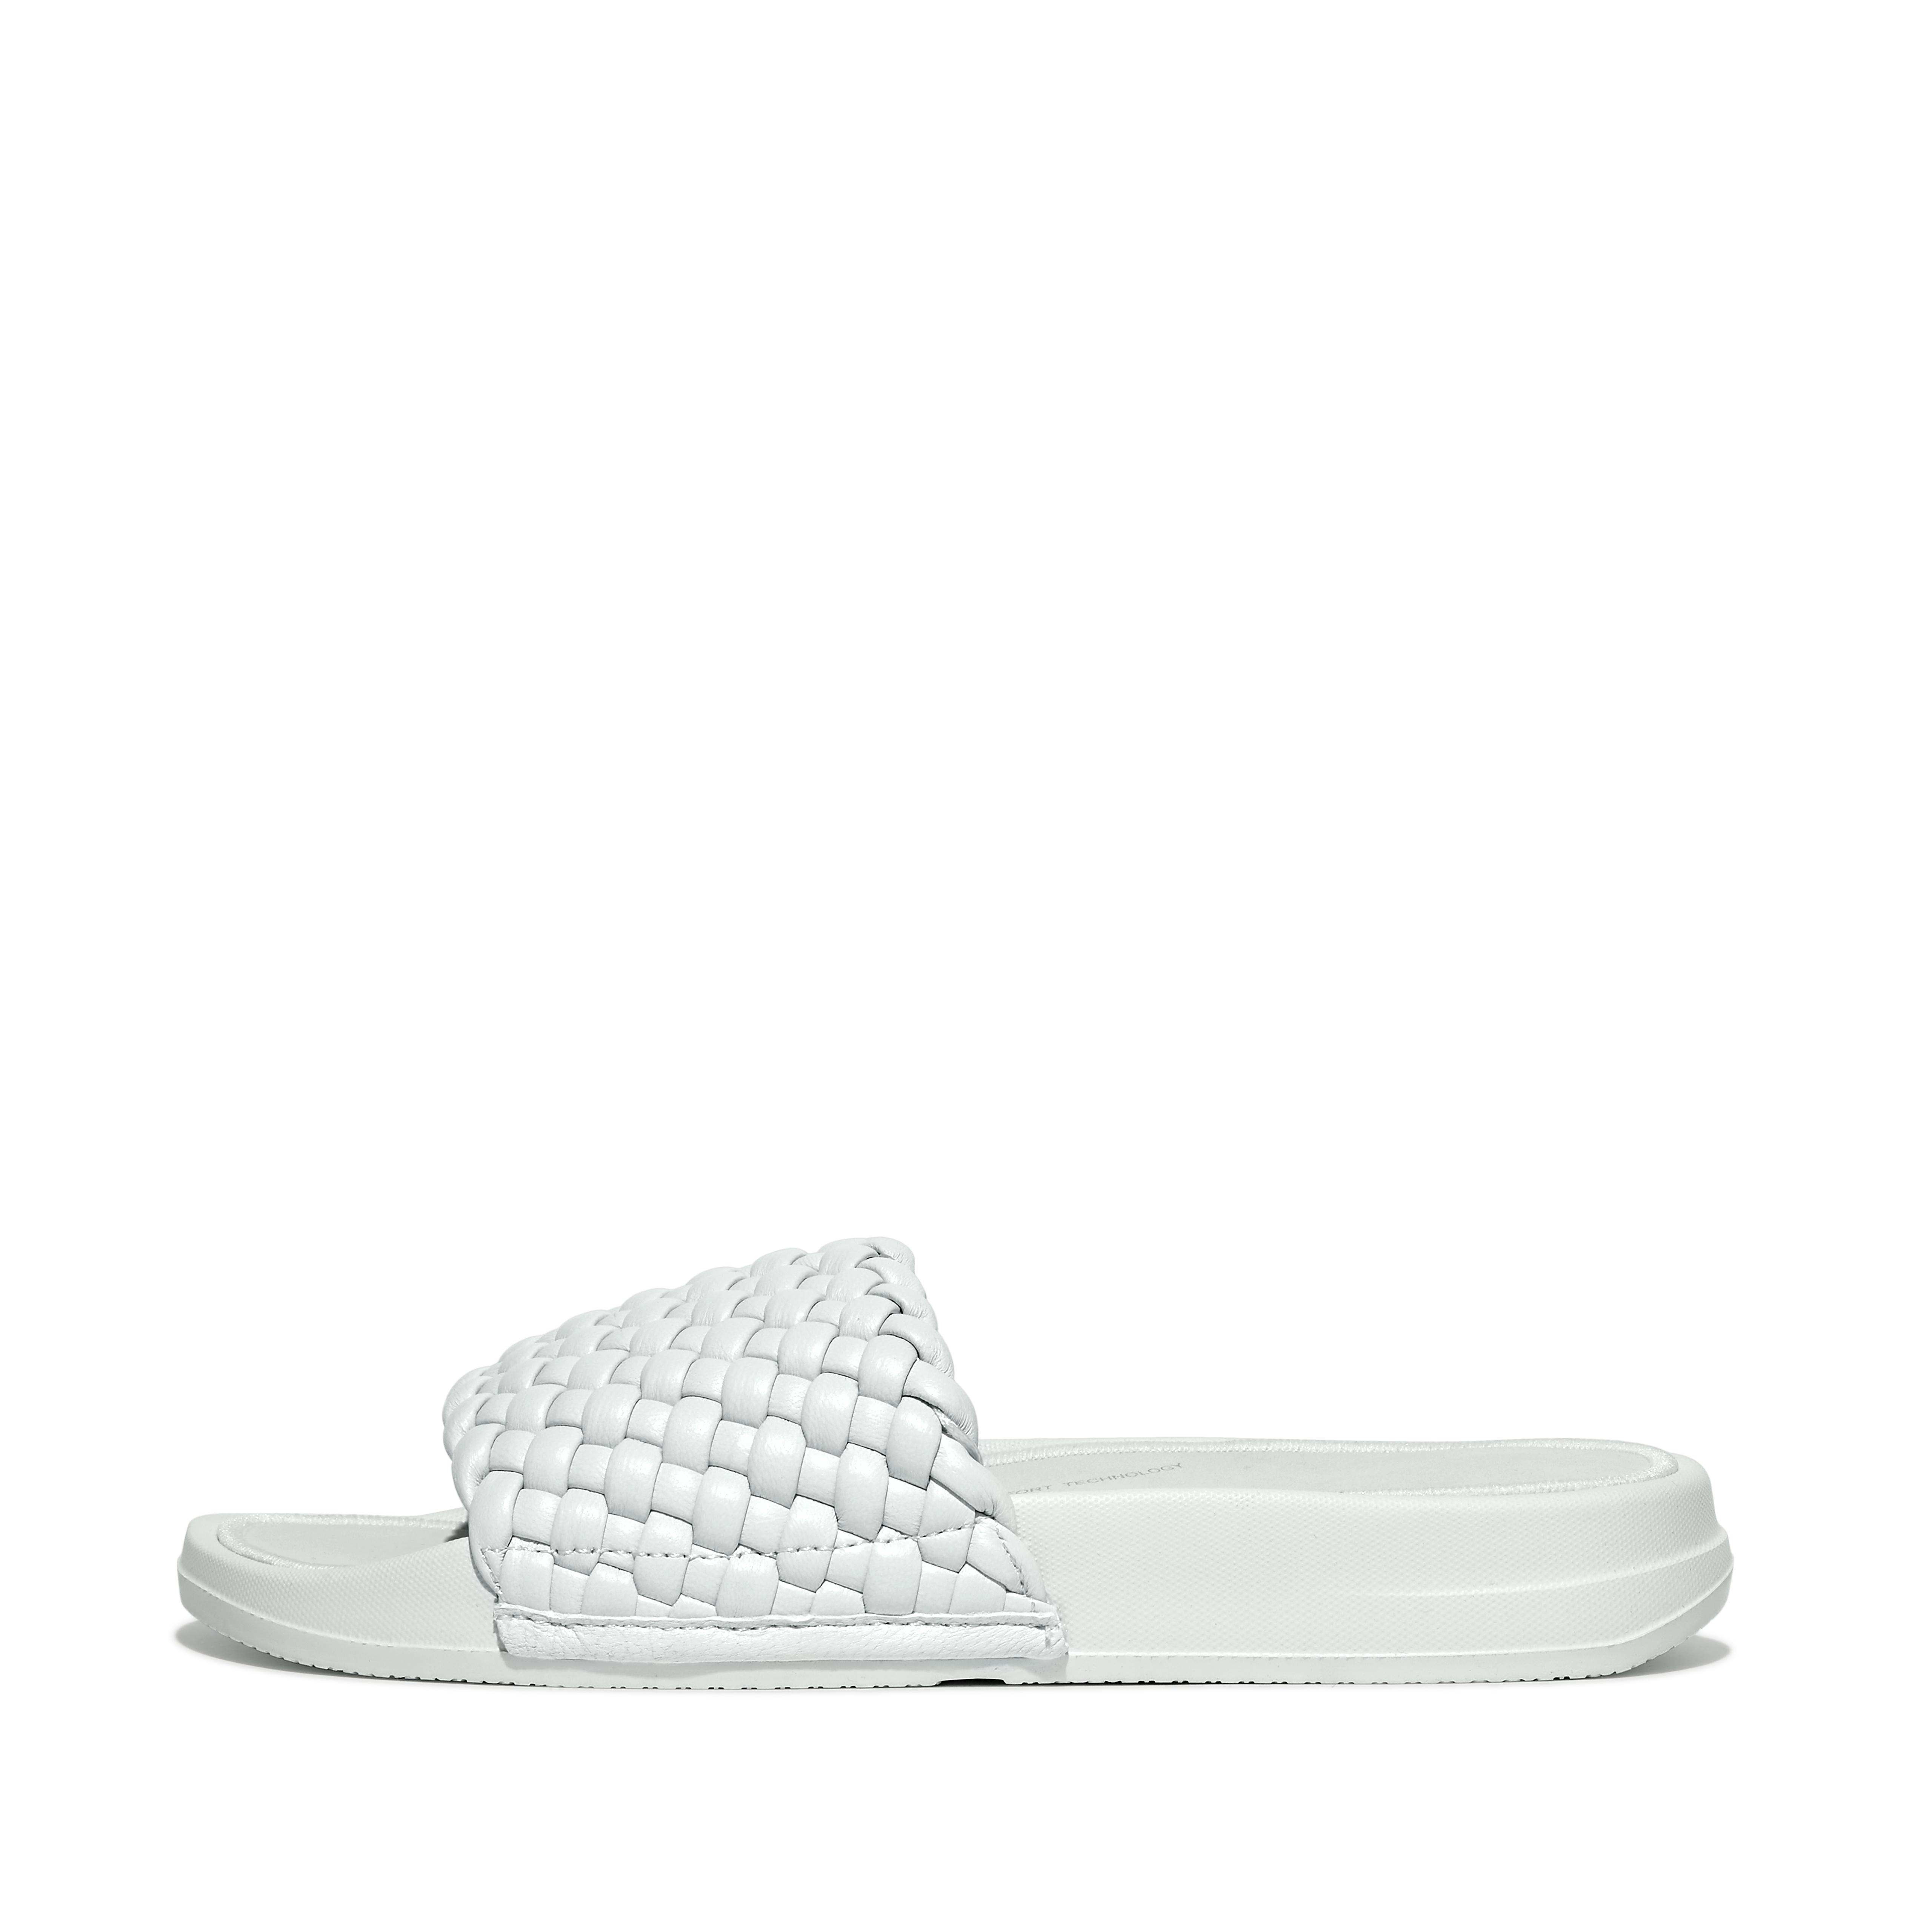 Fitflop Woven-Leather Slides